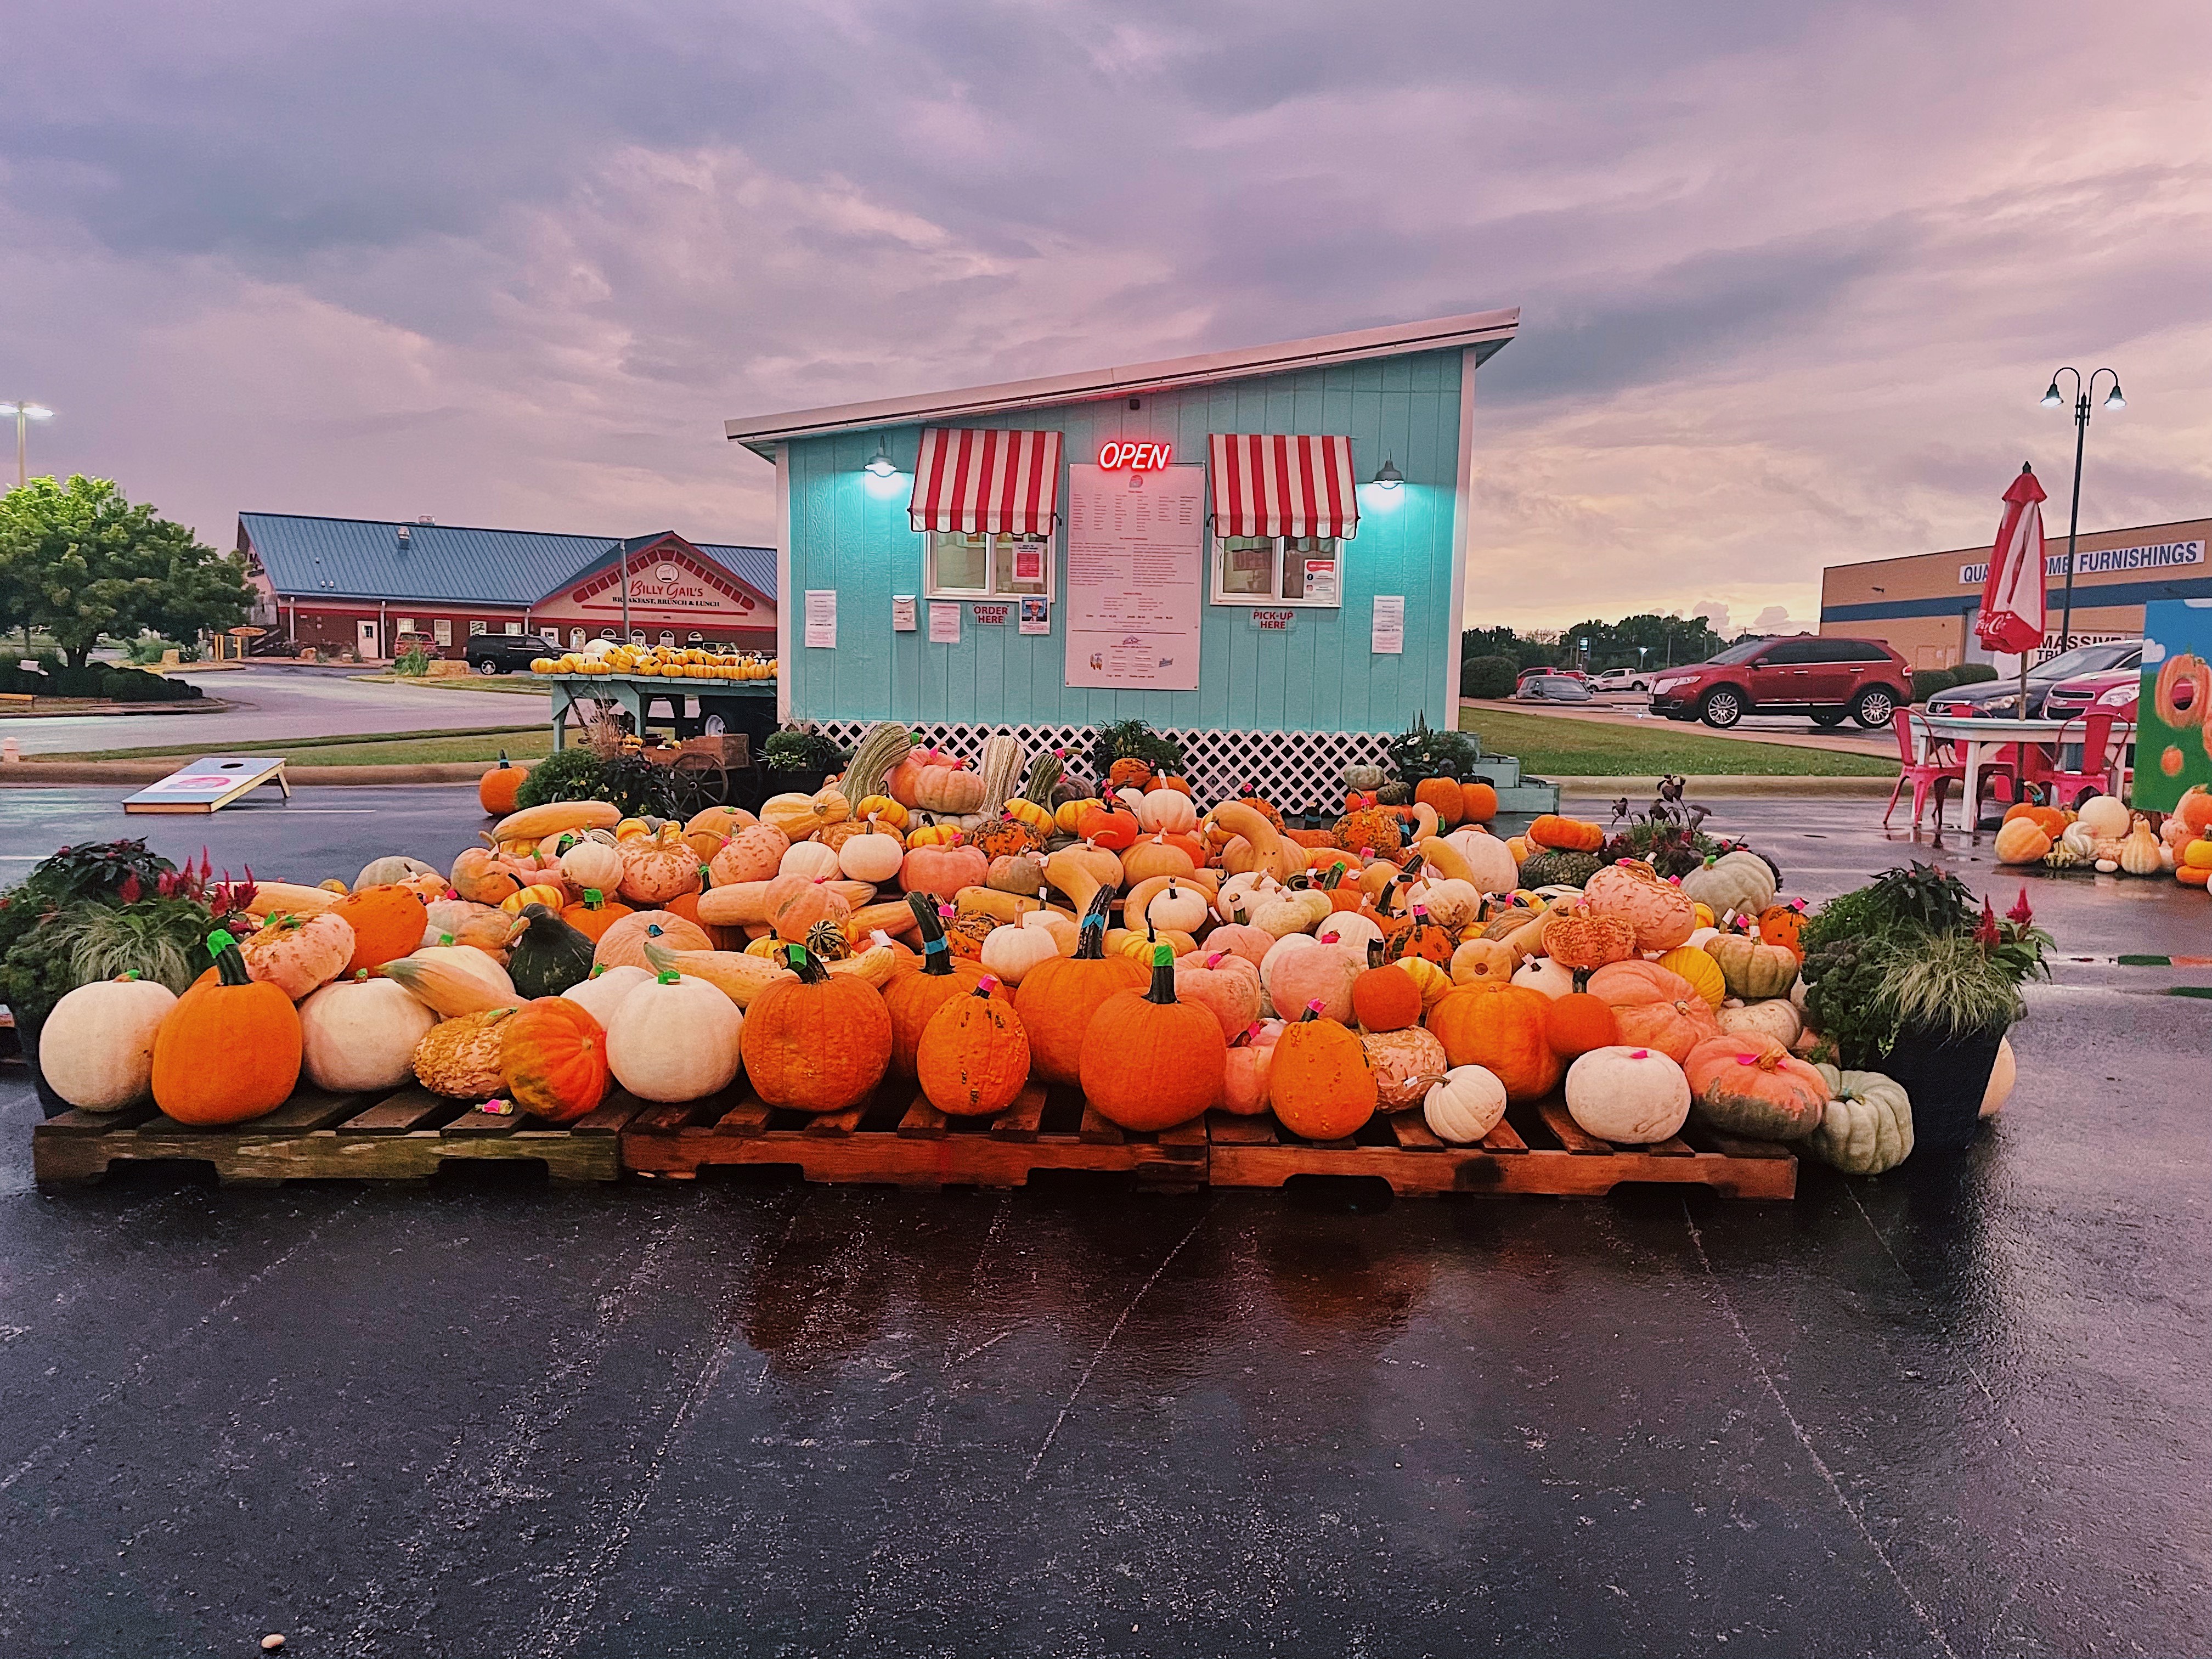 Hundreds of pumpkins sit next to a teal building with red and white striped awnings